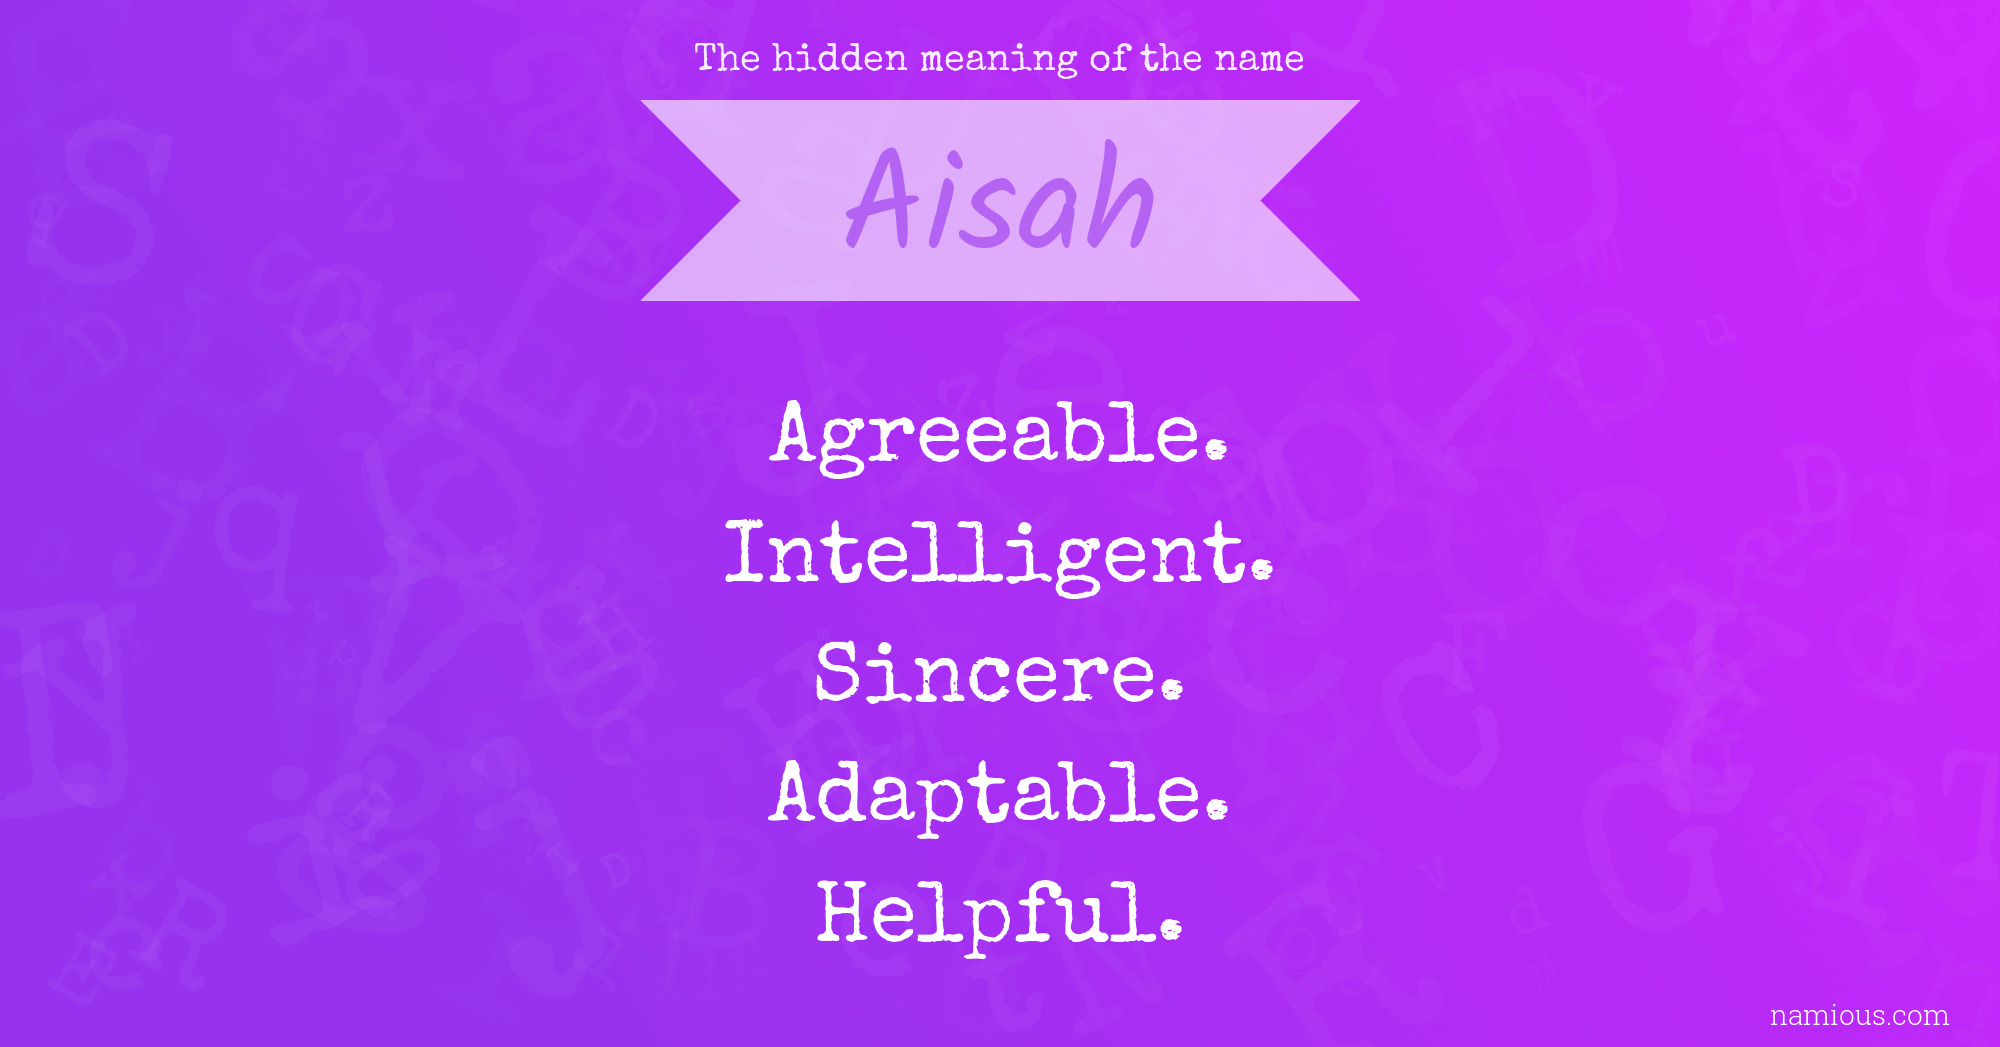 The hidden meaning of the name Aisah